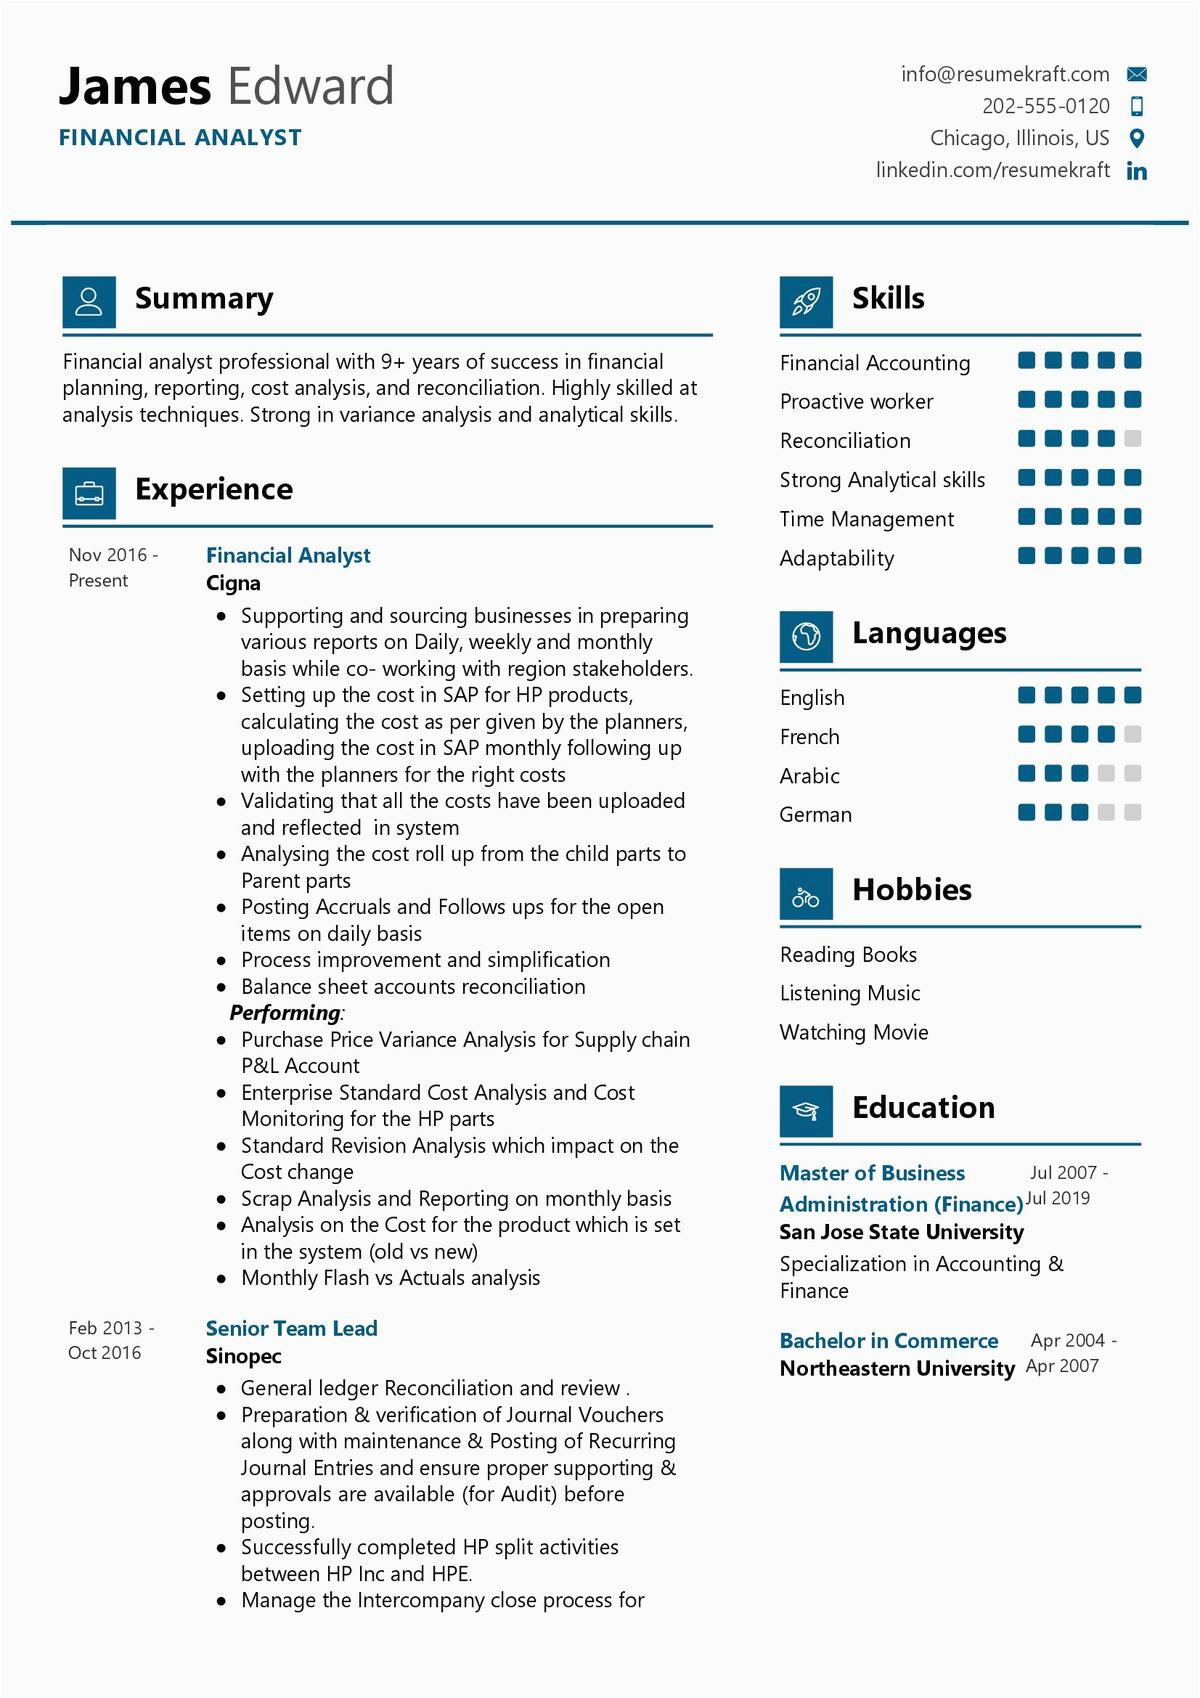 Resume Samples for Experienced Finance Professionals Financial Analyst Resume Sample 2021